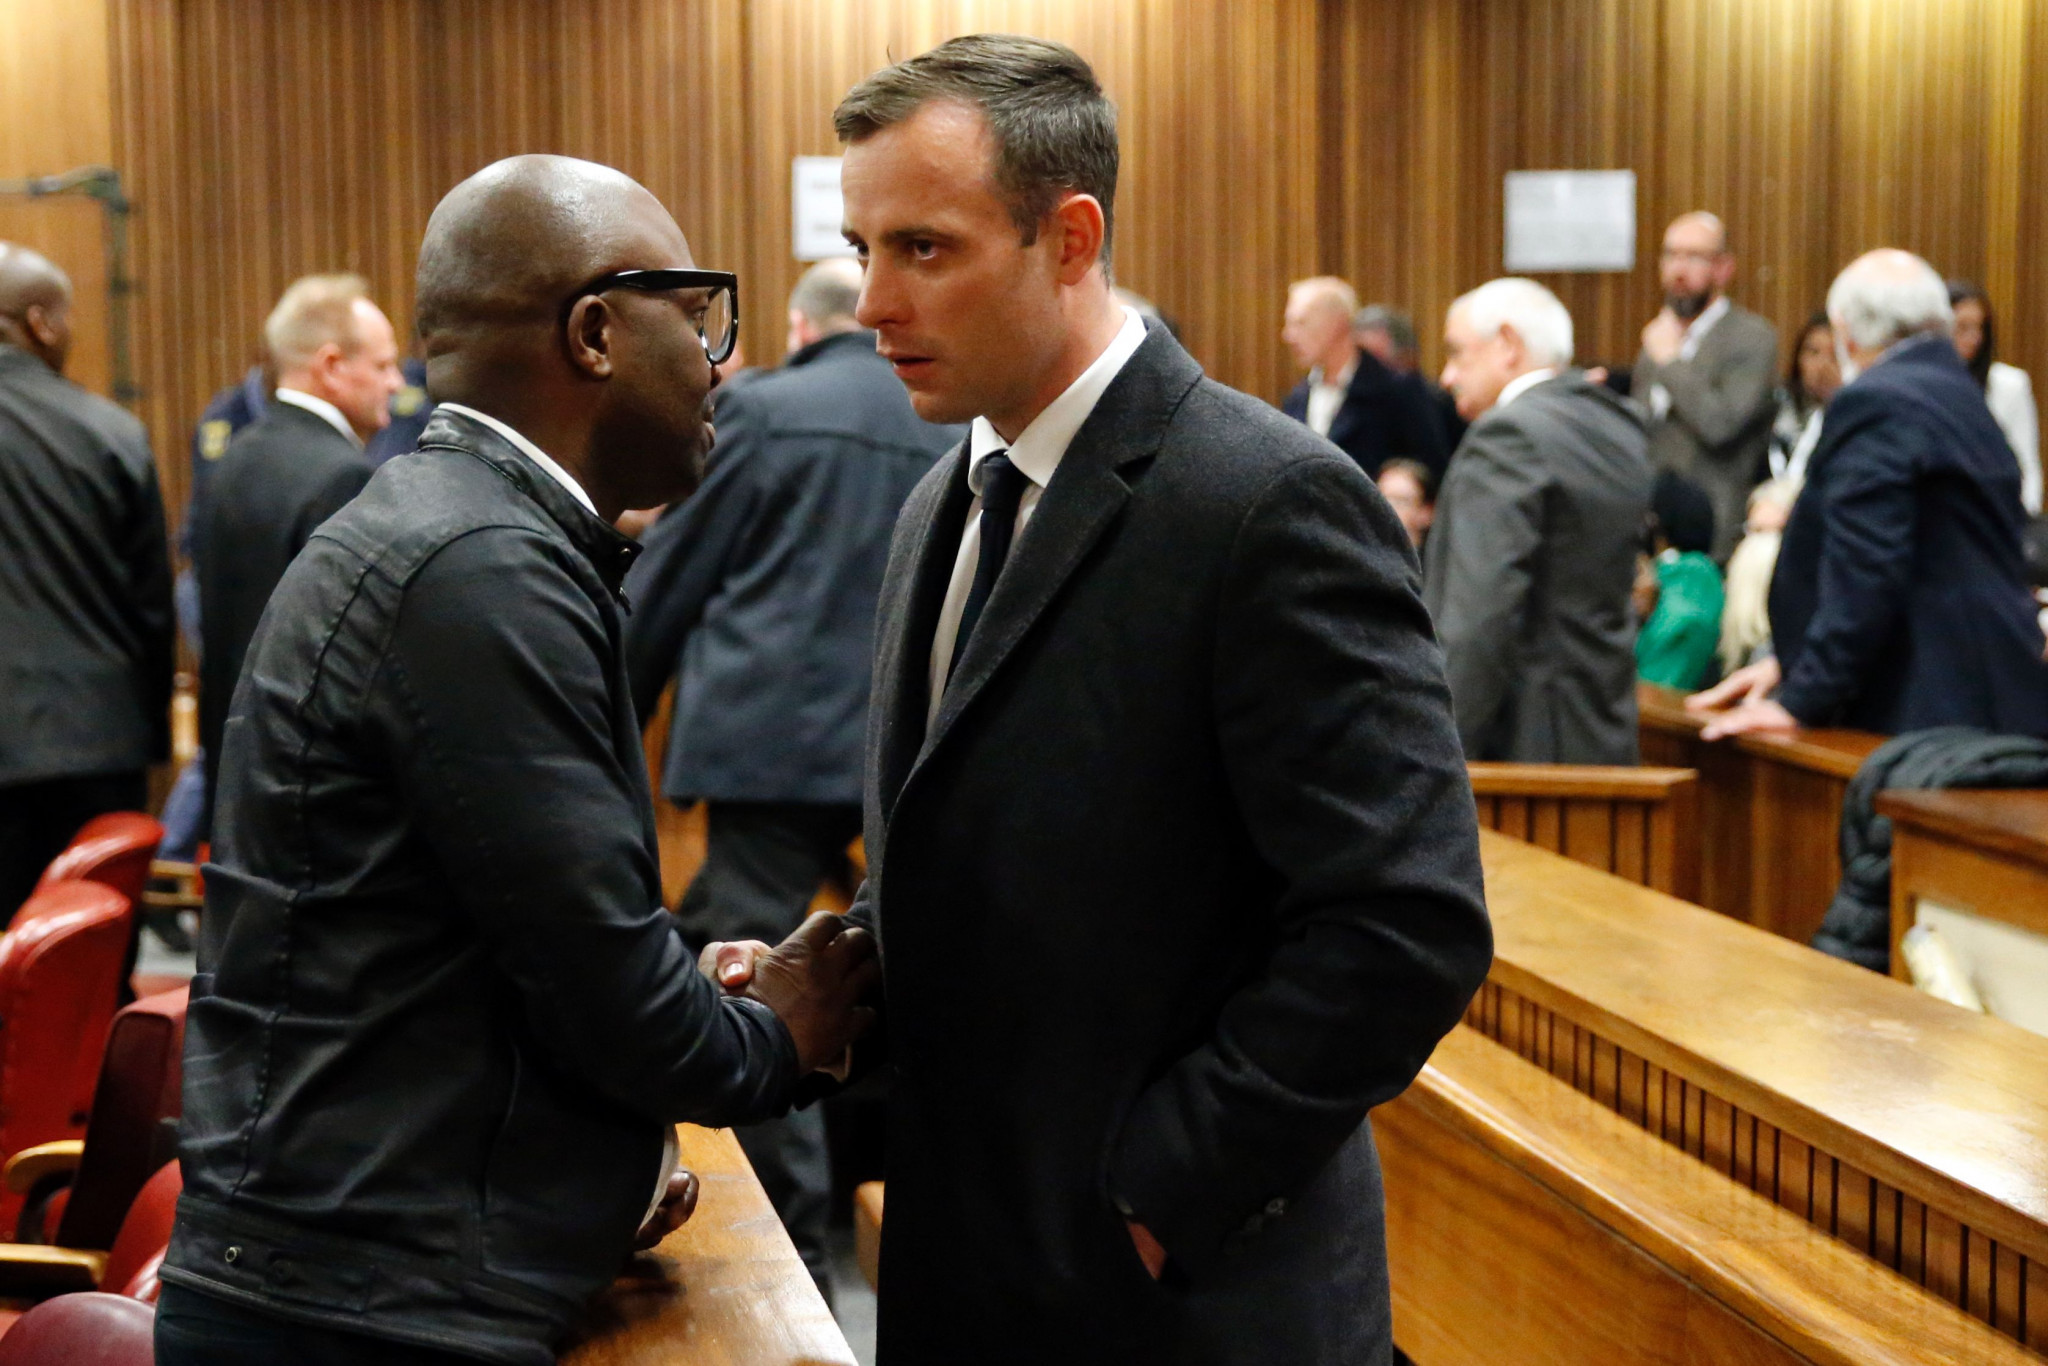 Pistorius efforts to appeal 13-year murder sentence ended by South African Constitutional Court